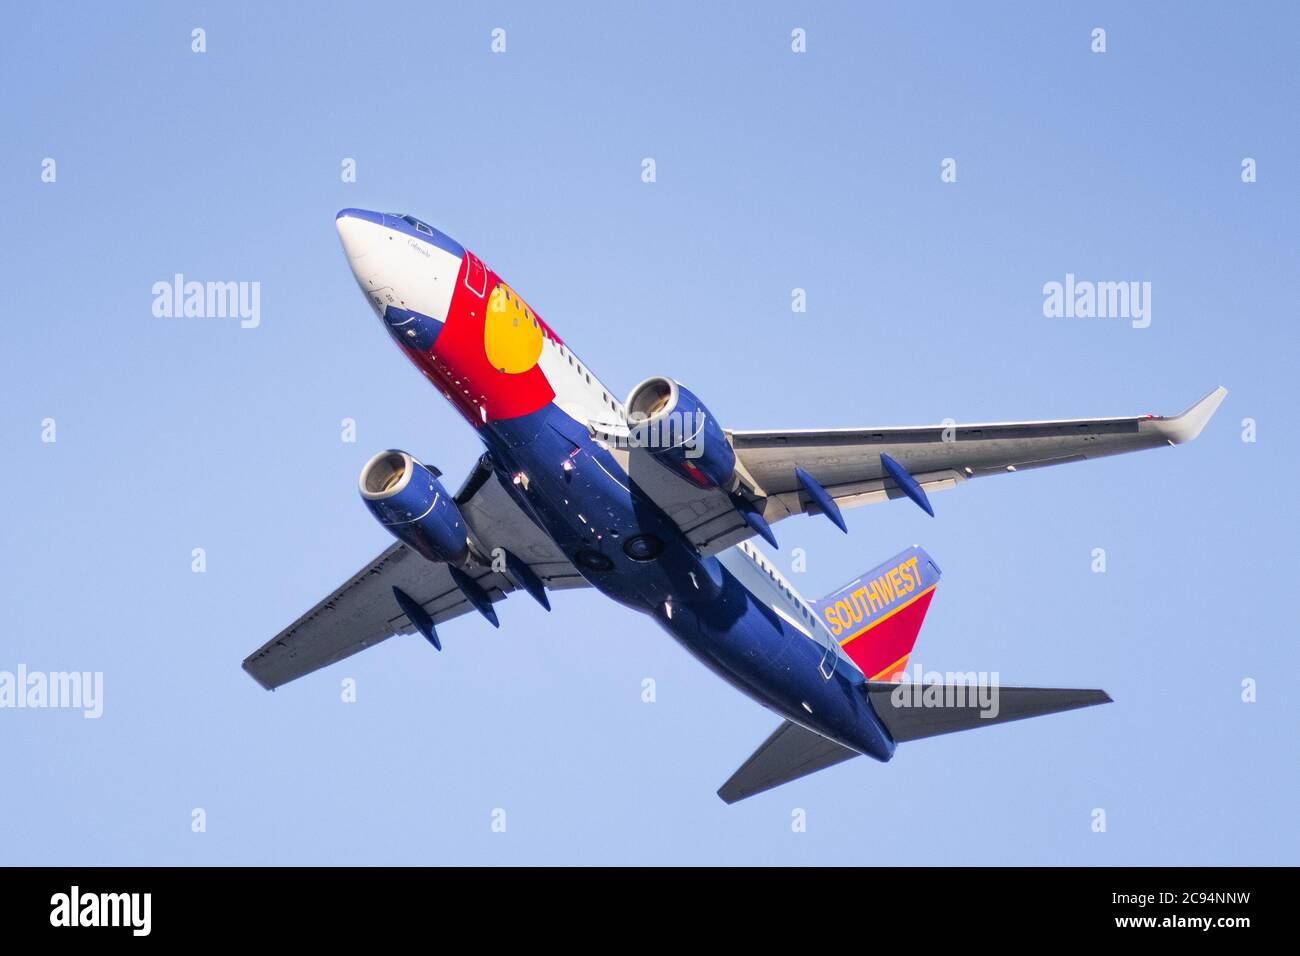 July 22, 2020 San Jose / CA / USA - Colorado One Southwest Airlines taking off from San Jose International Airport (SJC); Colorado One livery is honor Stock Photo